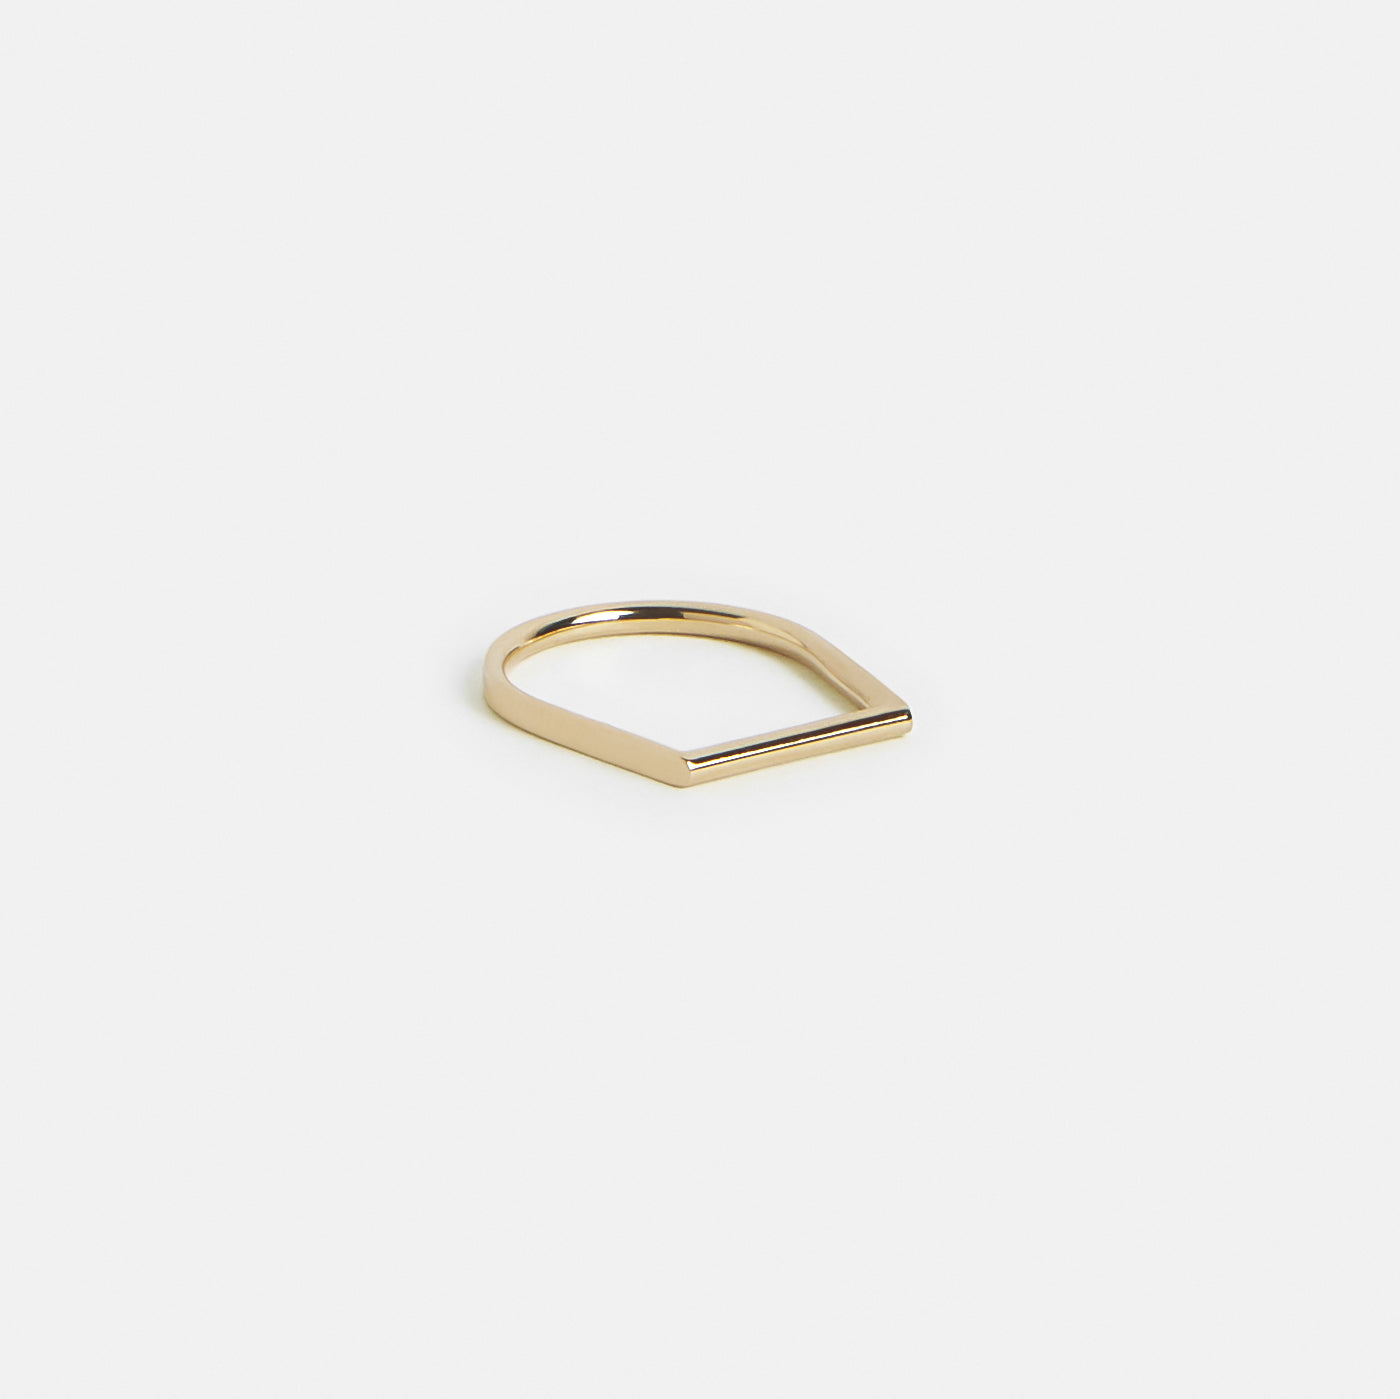 Lina Unusual Ring in 14k Gold By SHW Fine Jewelry NYC